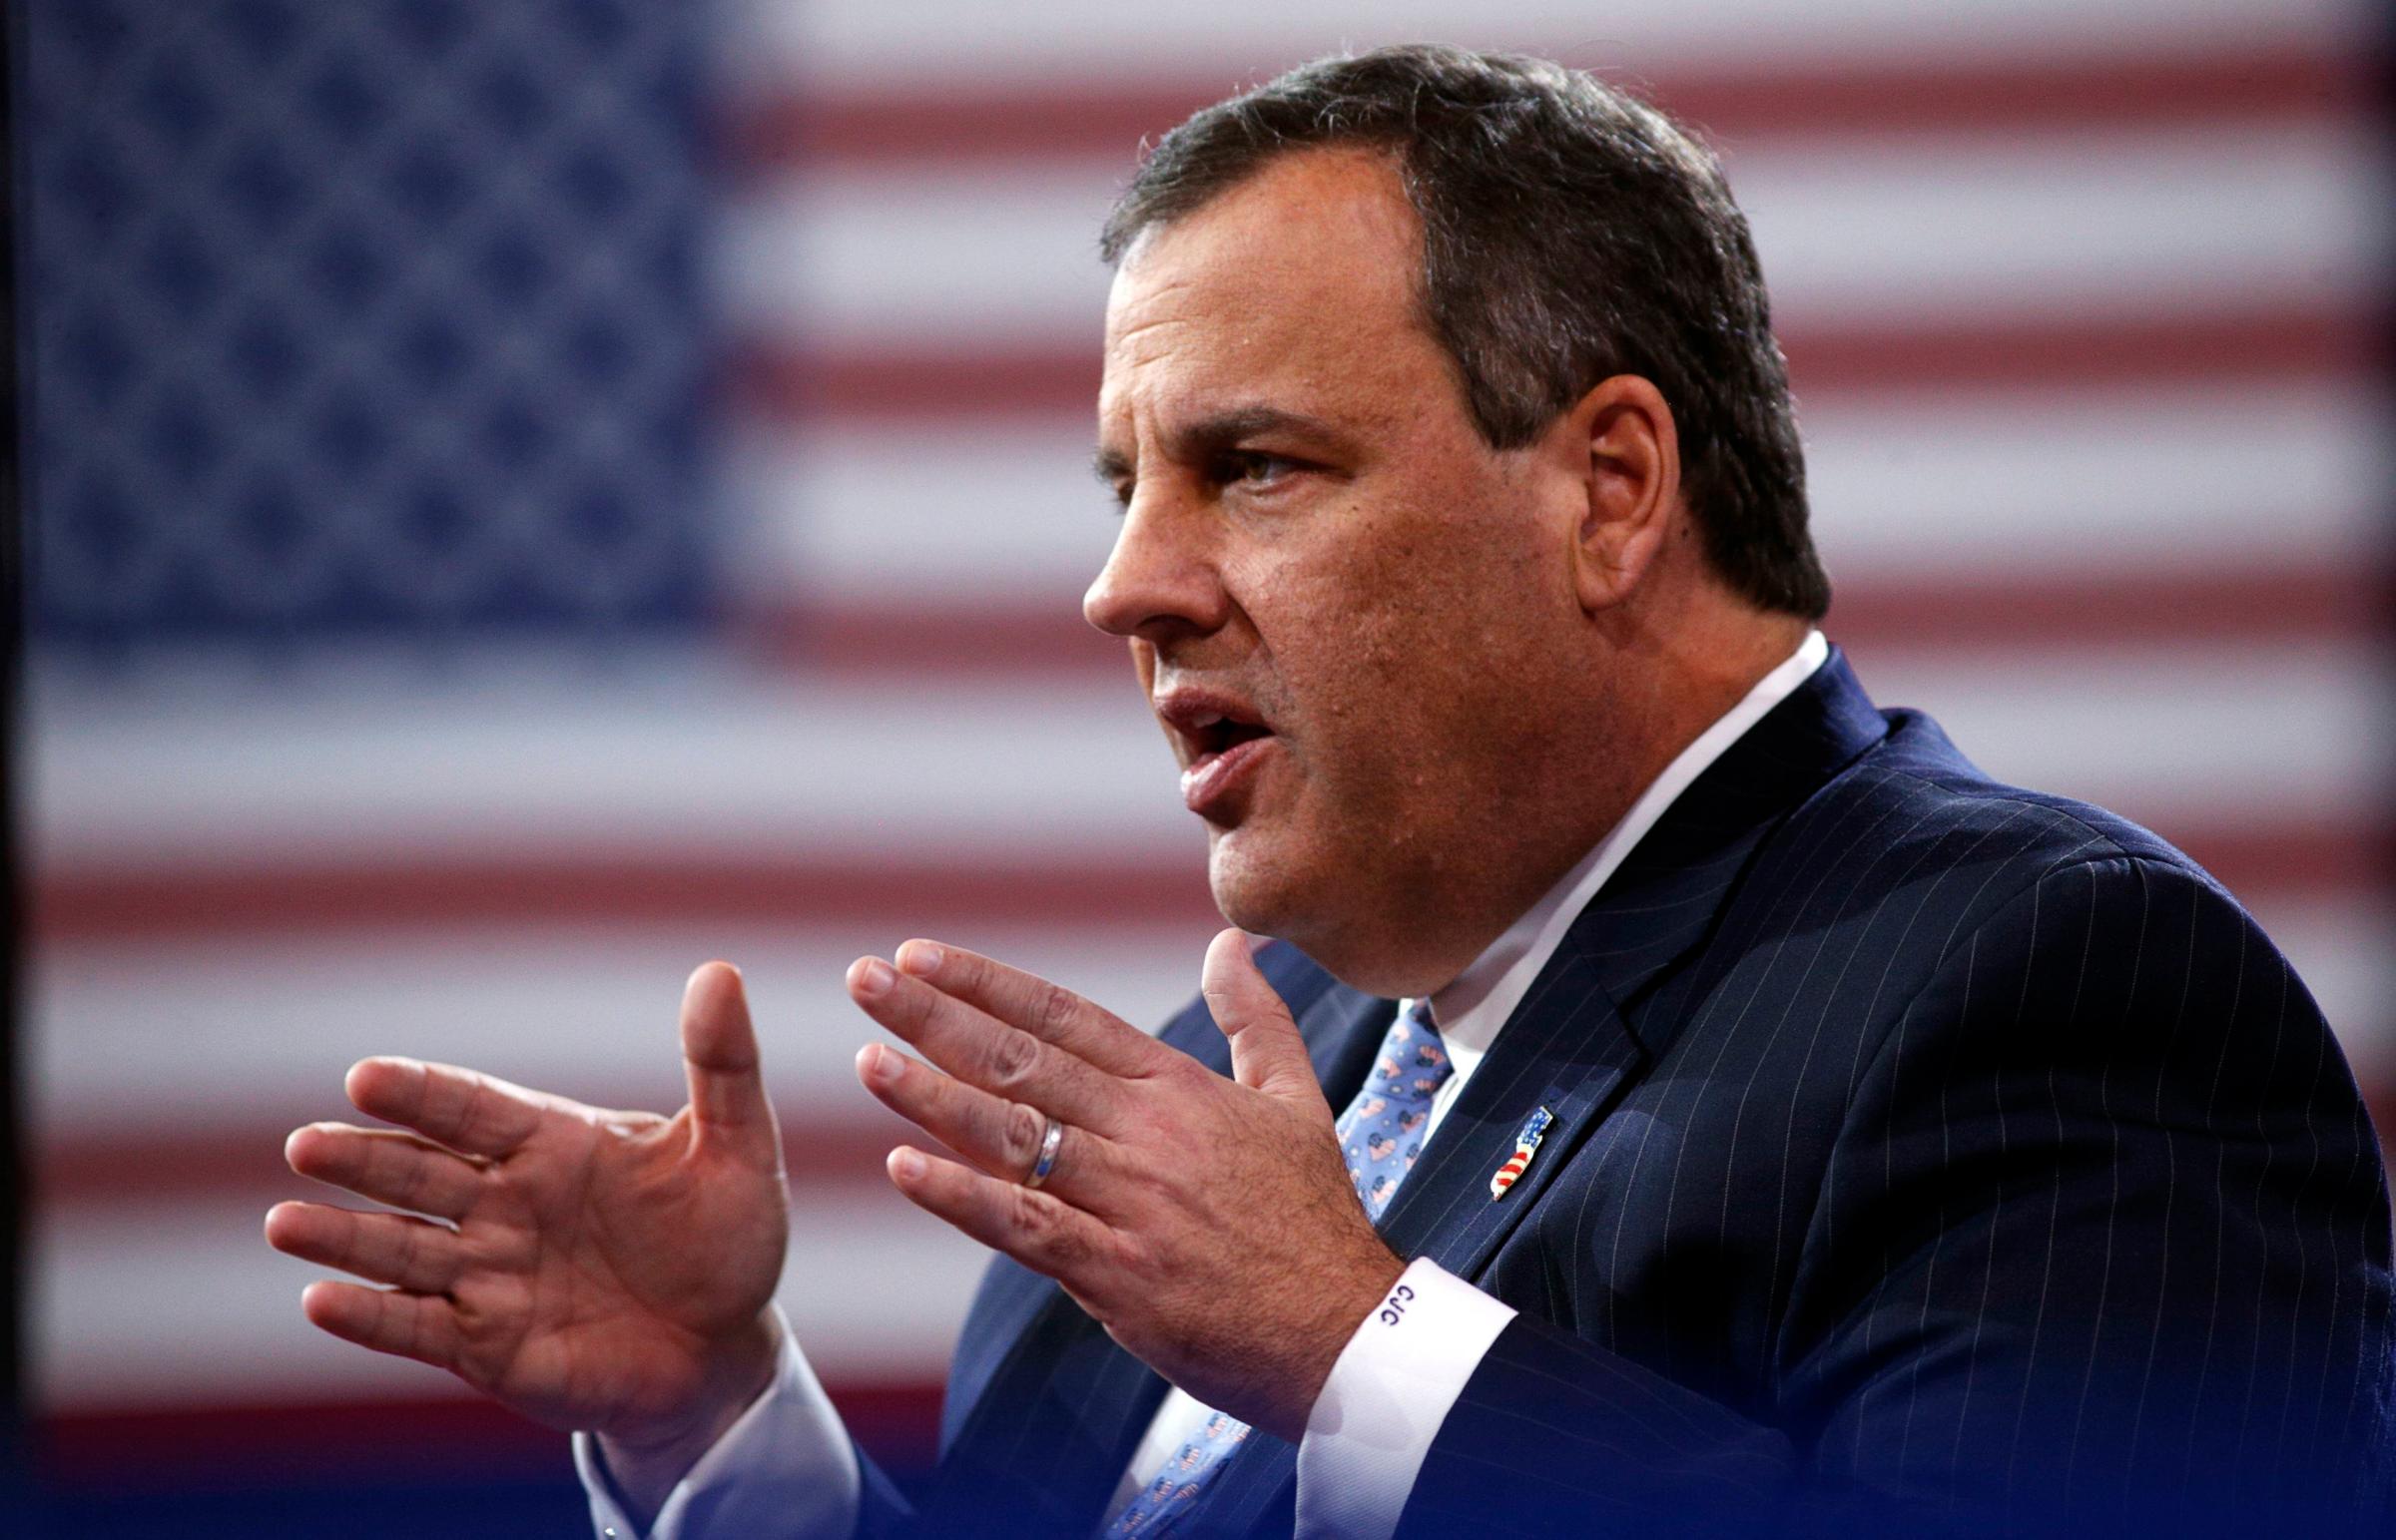 New Jersey Governor Christie speaks while being interviewed onstage at the Conservative Political Action Conference (CPAC) at National Harbor in Maryland